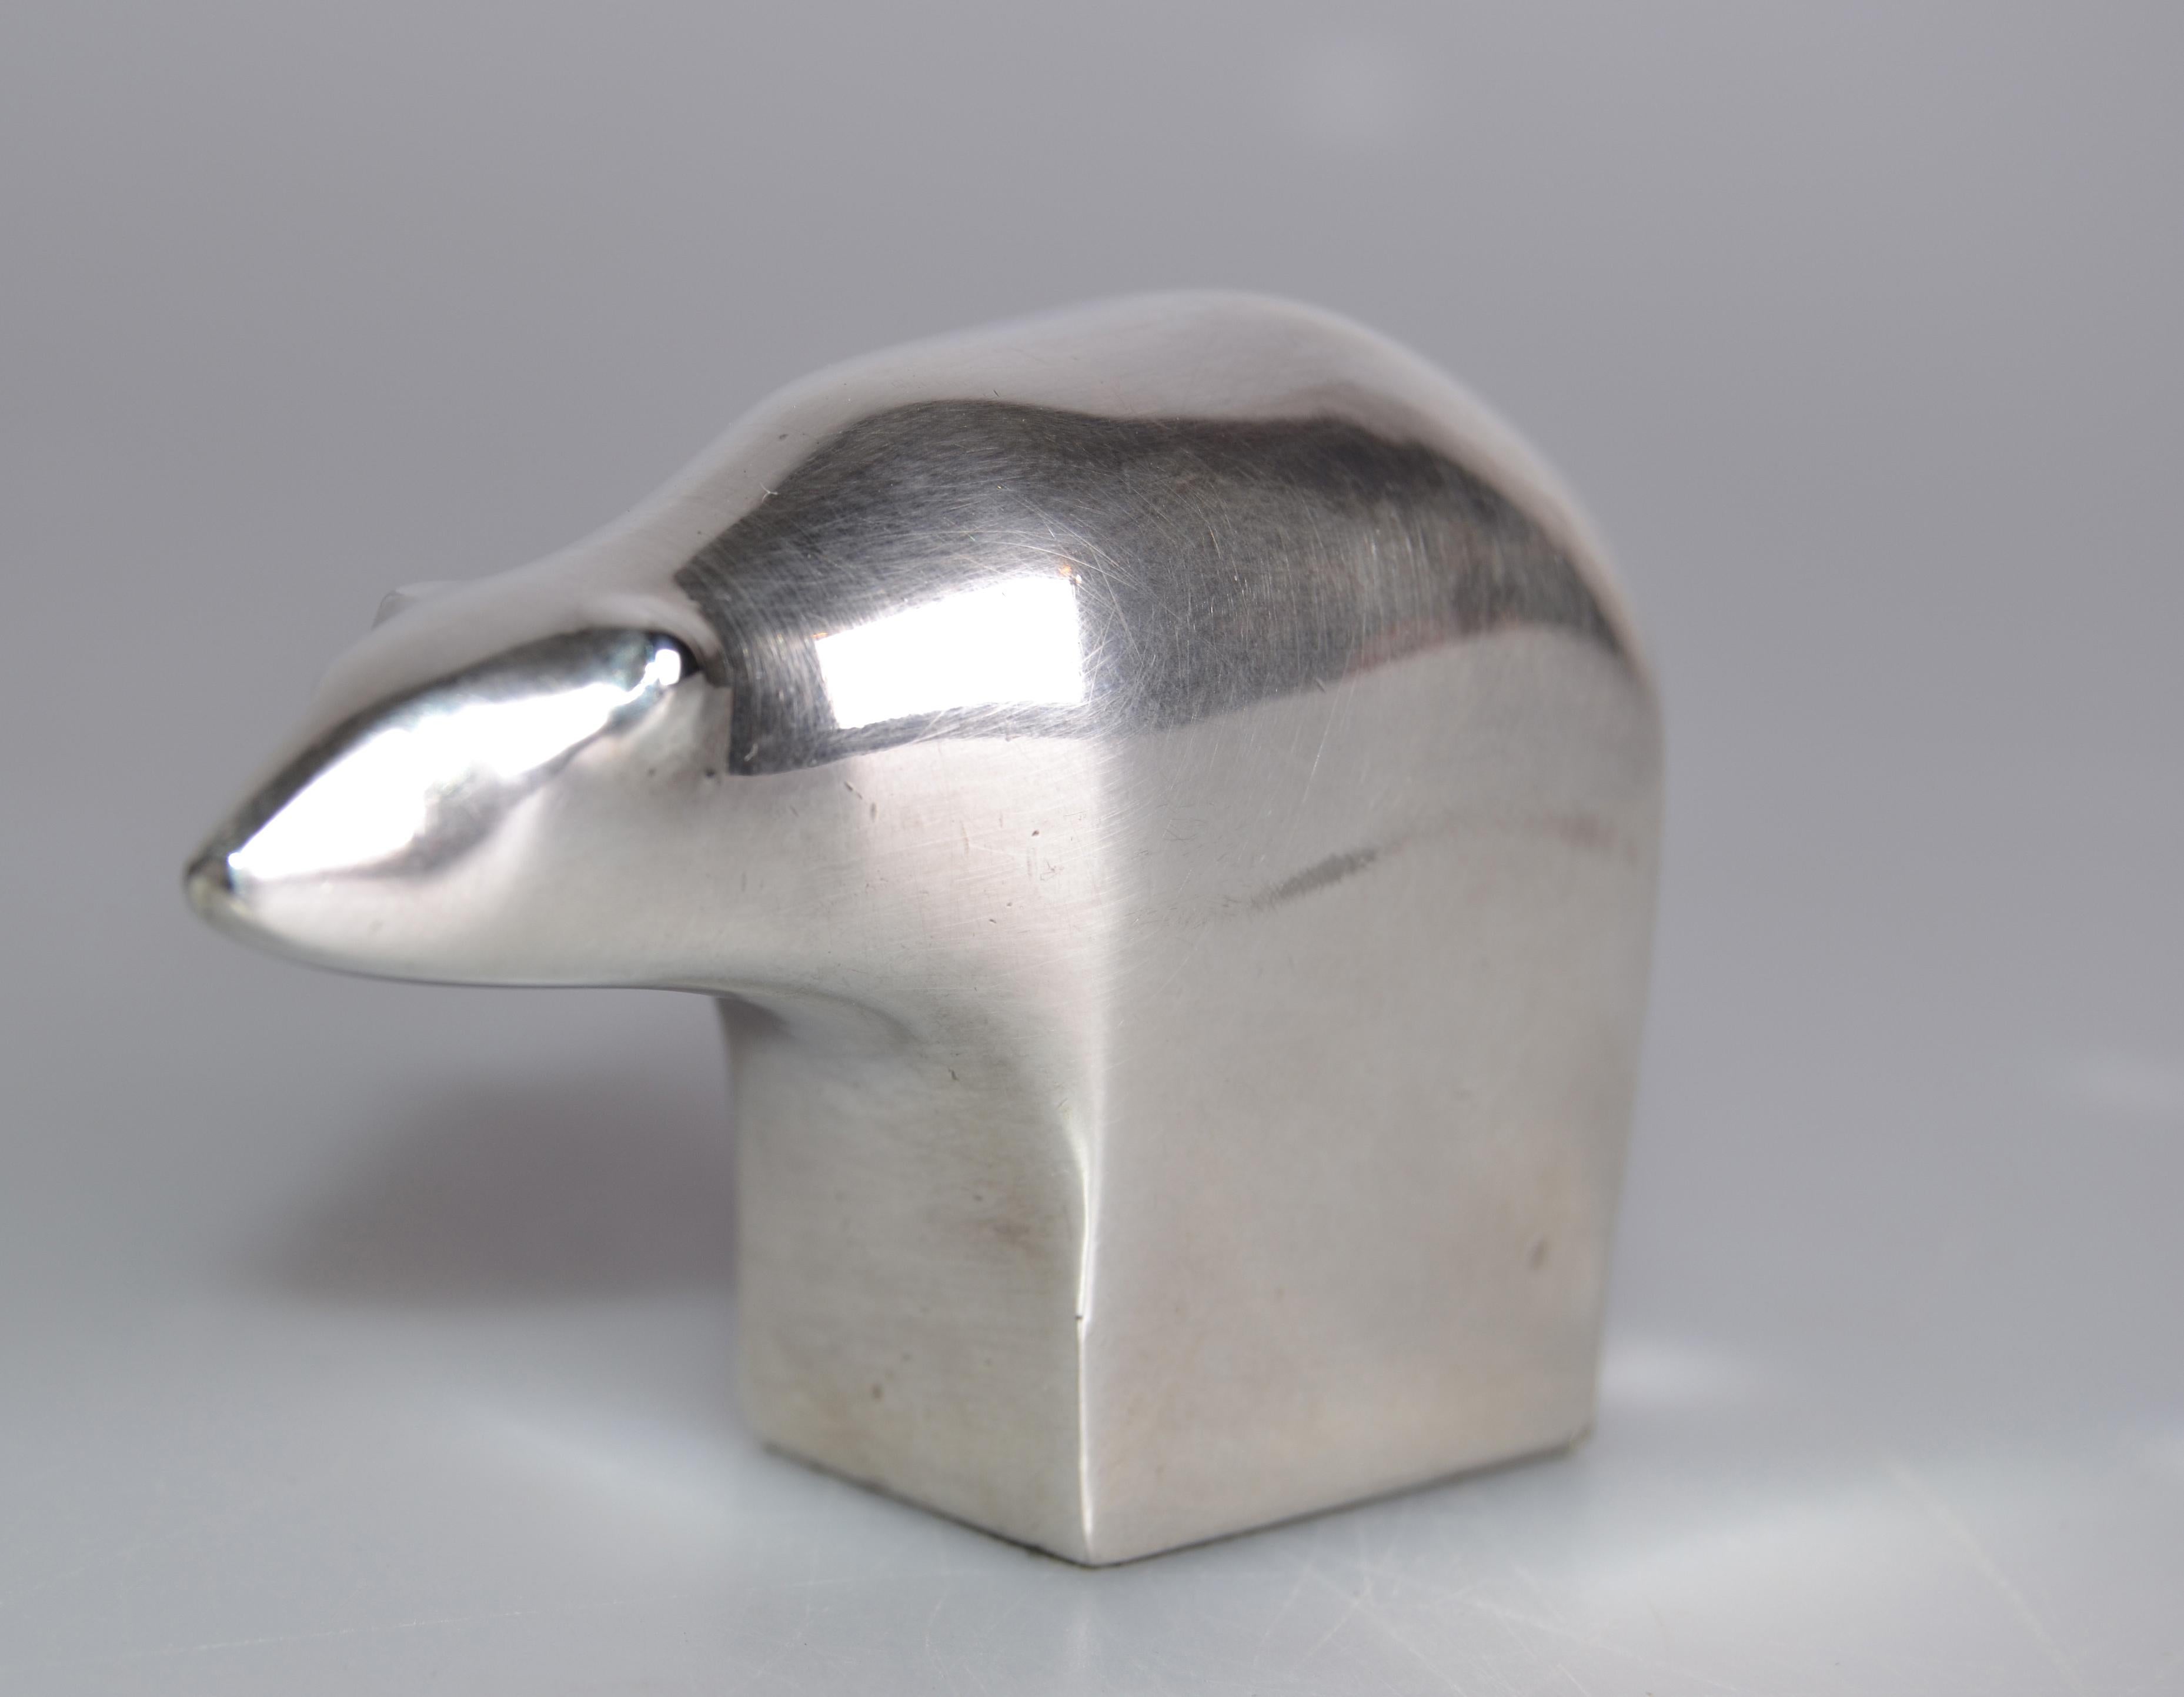 Japanese Dansk silver-plated polar bear paperweight. Marked Dansk Designs Japan on the underside.
Great collectors' piece and a Gift idea for the Holiday Season. 